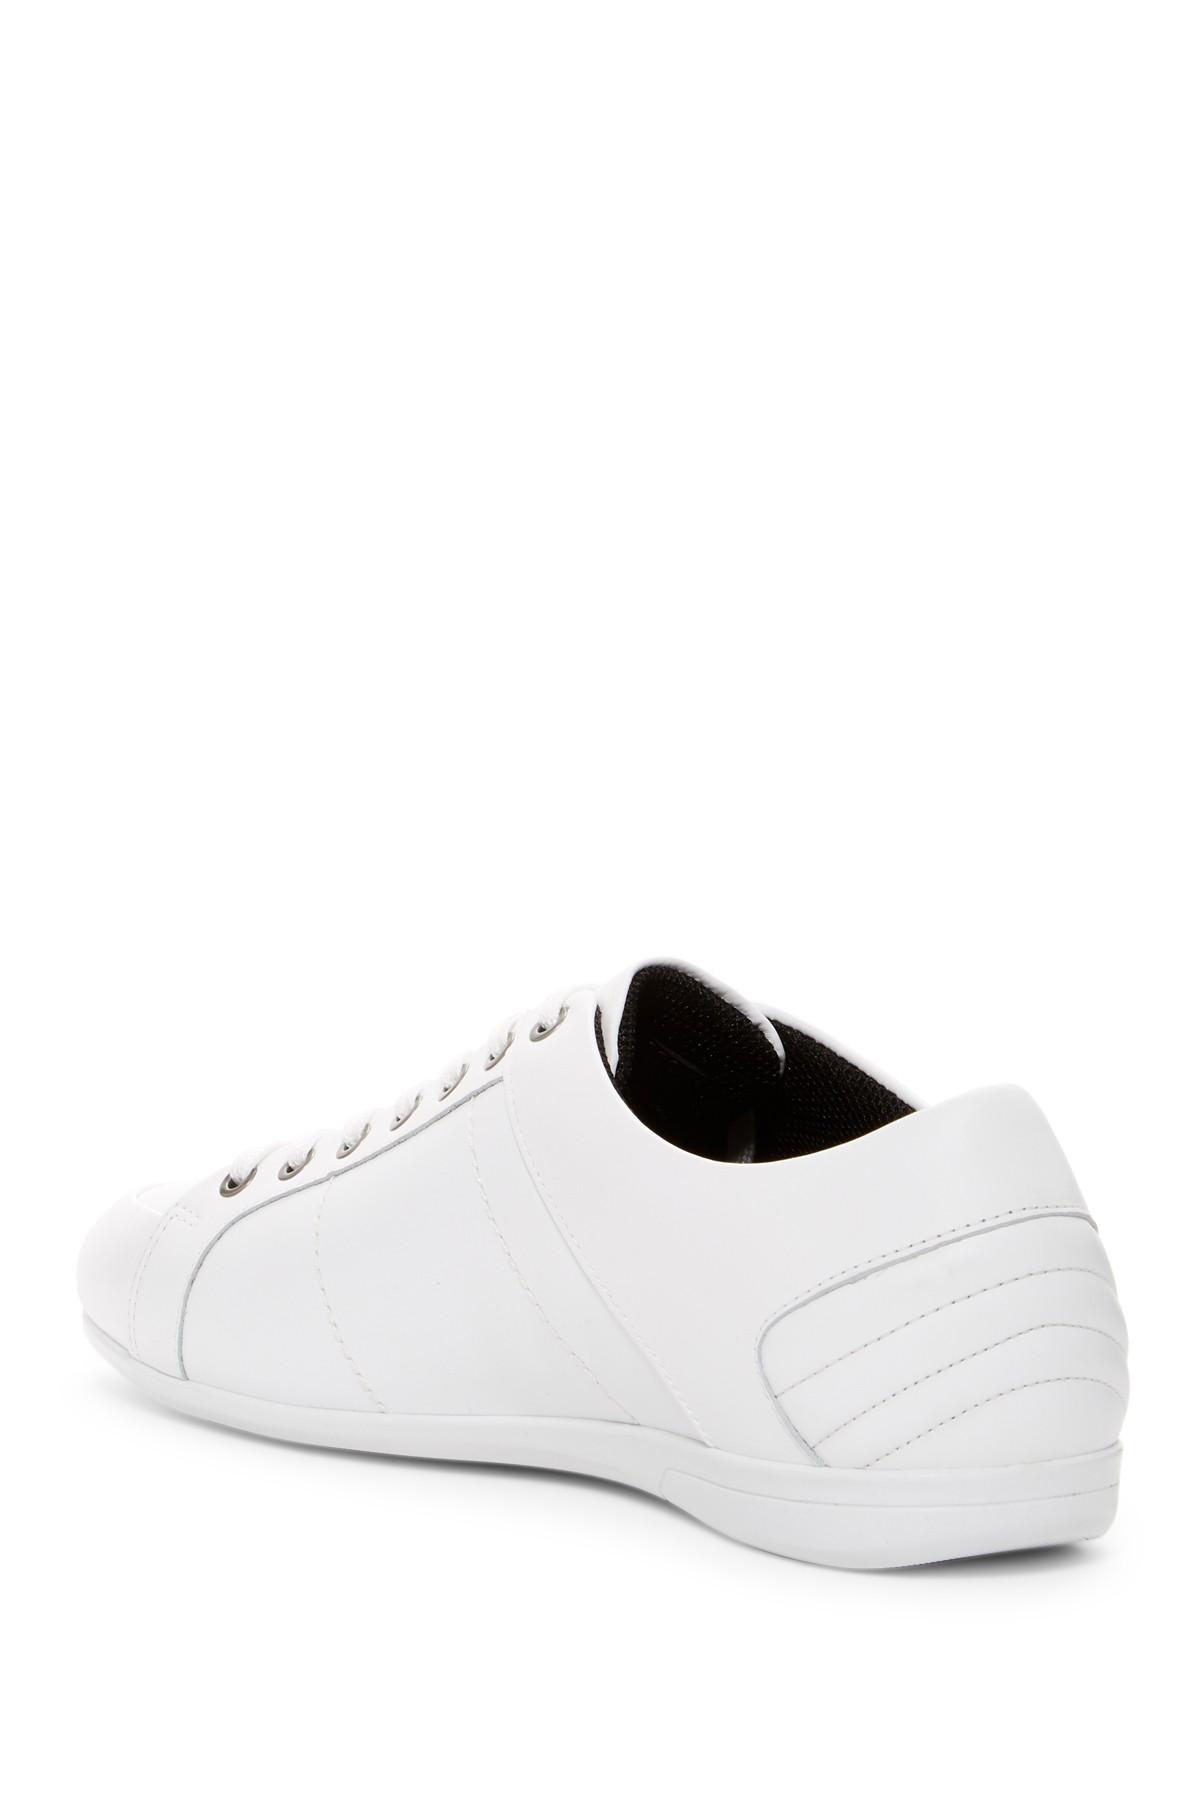 Versace Nappa Leather Sneaker in White 